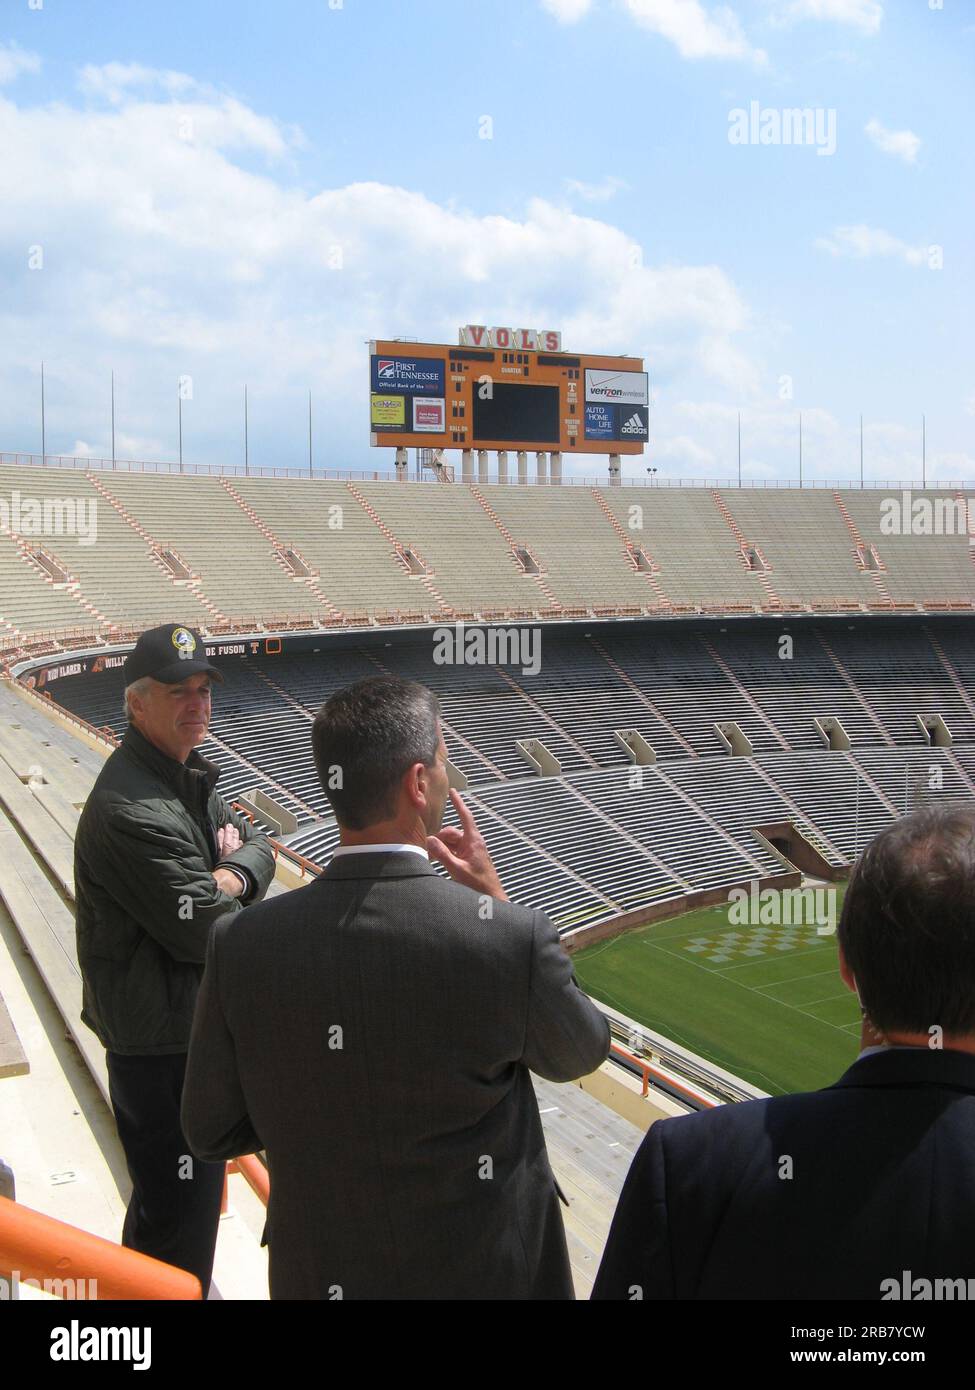 Secretary Dirk Kempthorne visiting Neyland Stadium, home of the University of Tennessee football team, during stop in Knoxville, Tennessee Stock Photo